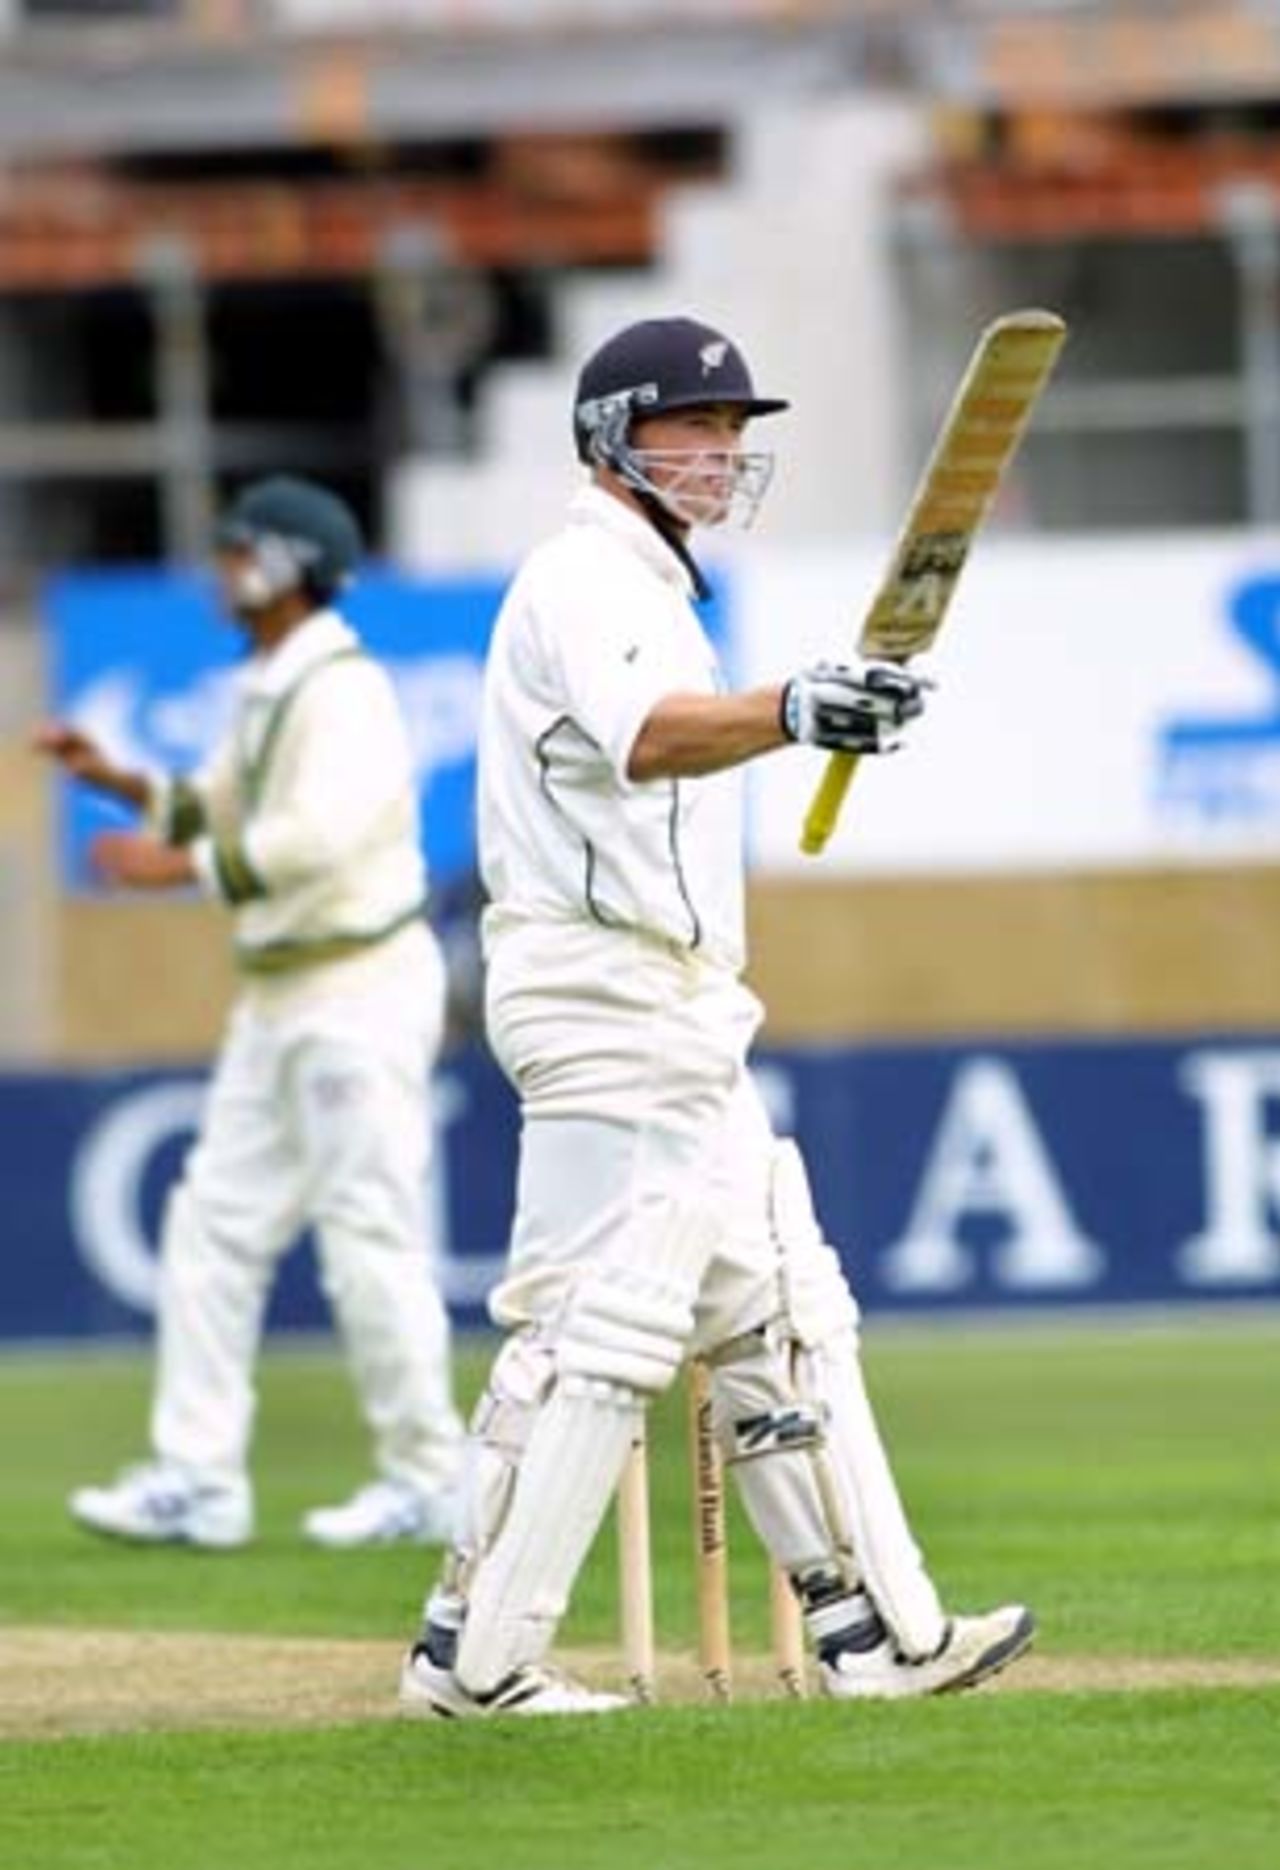 New Zealand opening batsman Matthew Bell raises his bat in celebration of reaching his second Test 50. Bell went on to score 75 in his first innings. Pakistan short leg fielder Faisal Iqbal receives the ball in the background. 2nd Test: New Zealand v Pakistan at Jade Stadium, Christchurch, 15-19 March 2001 (15 March 2001).